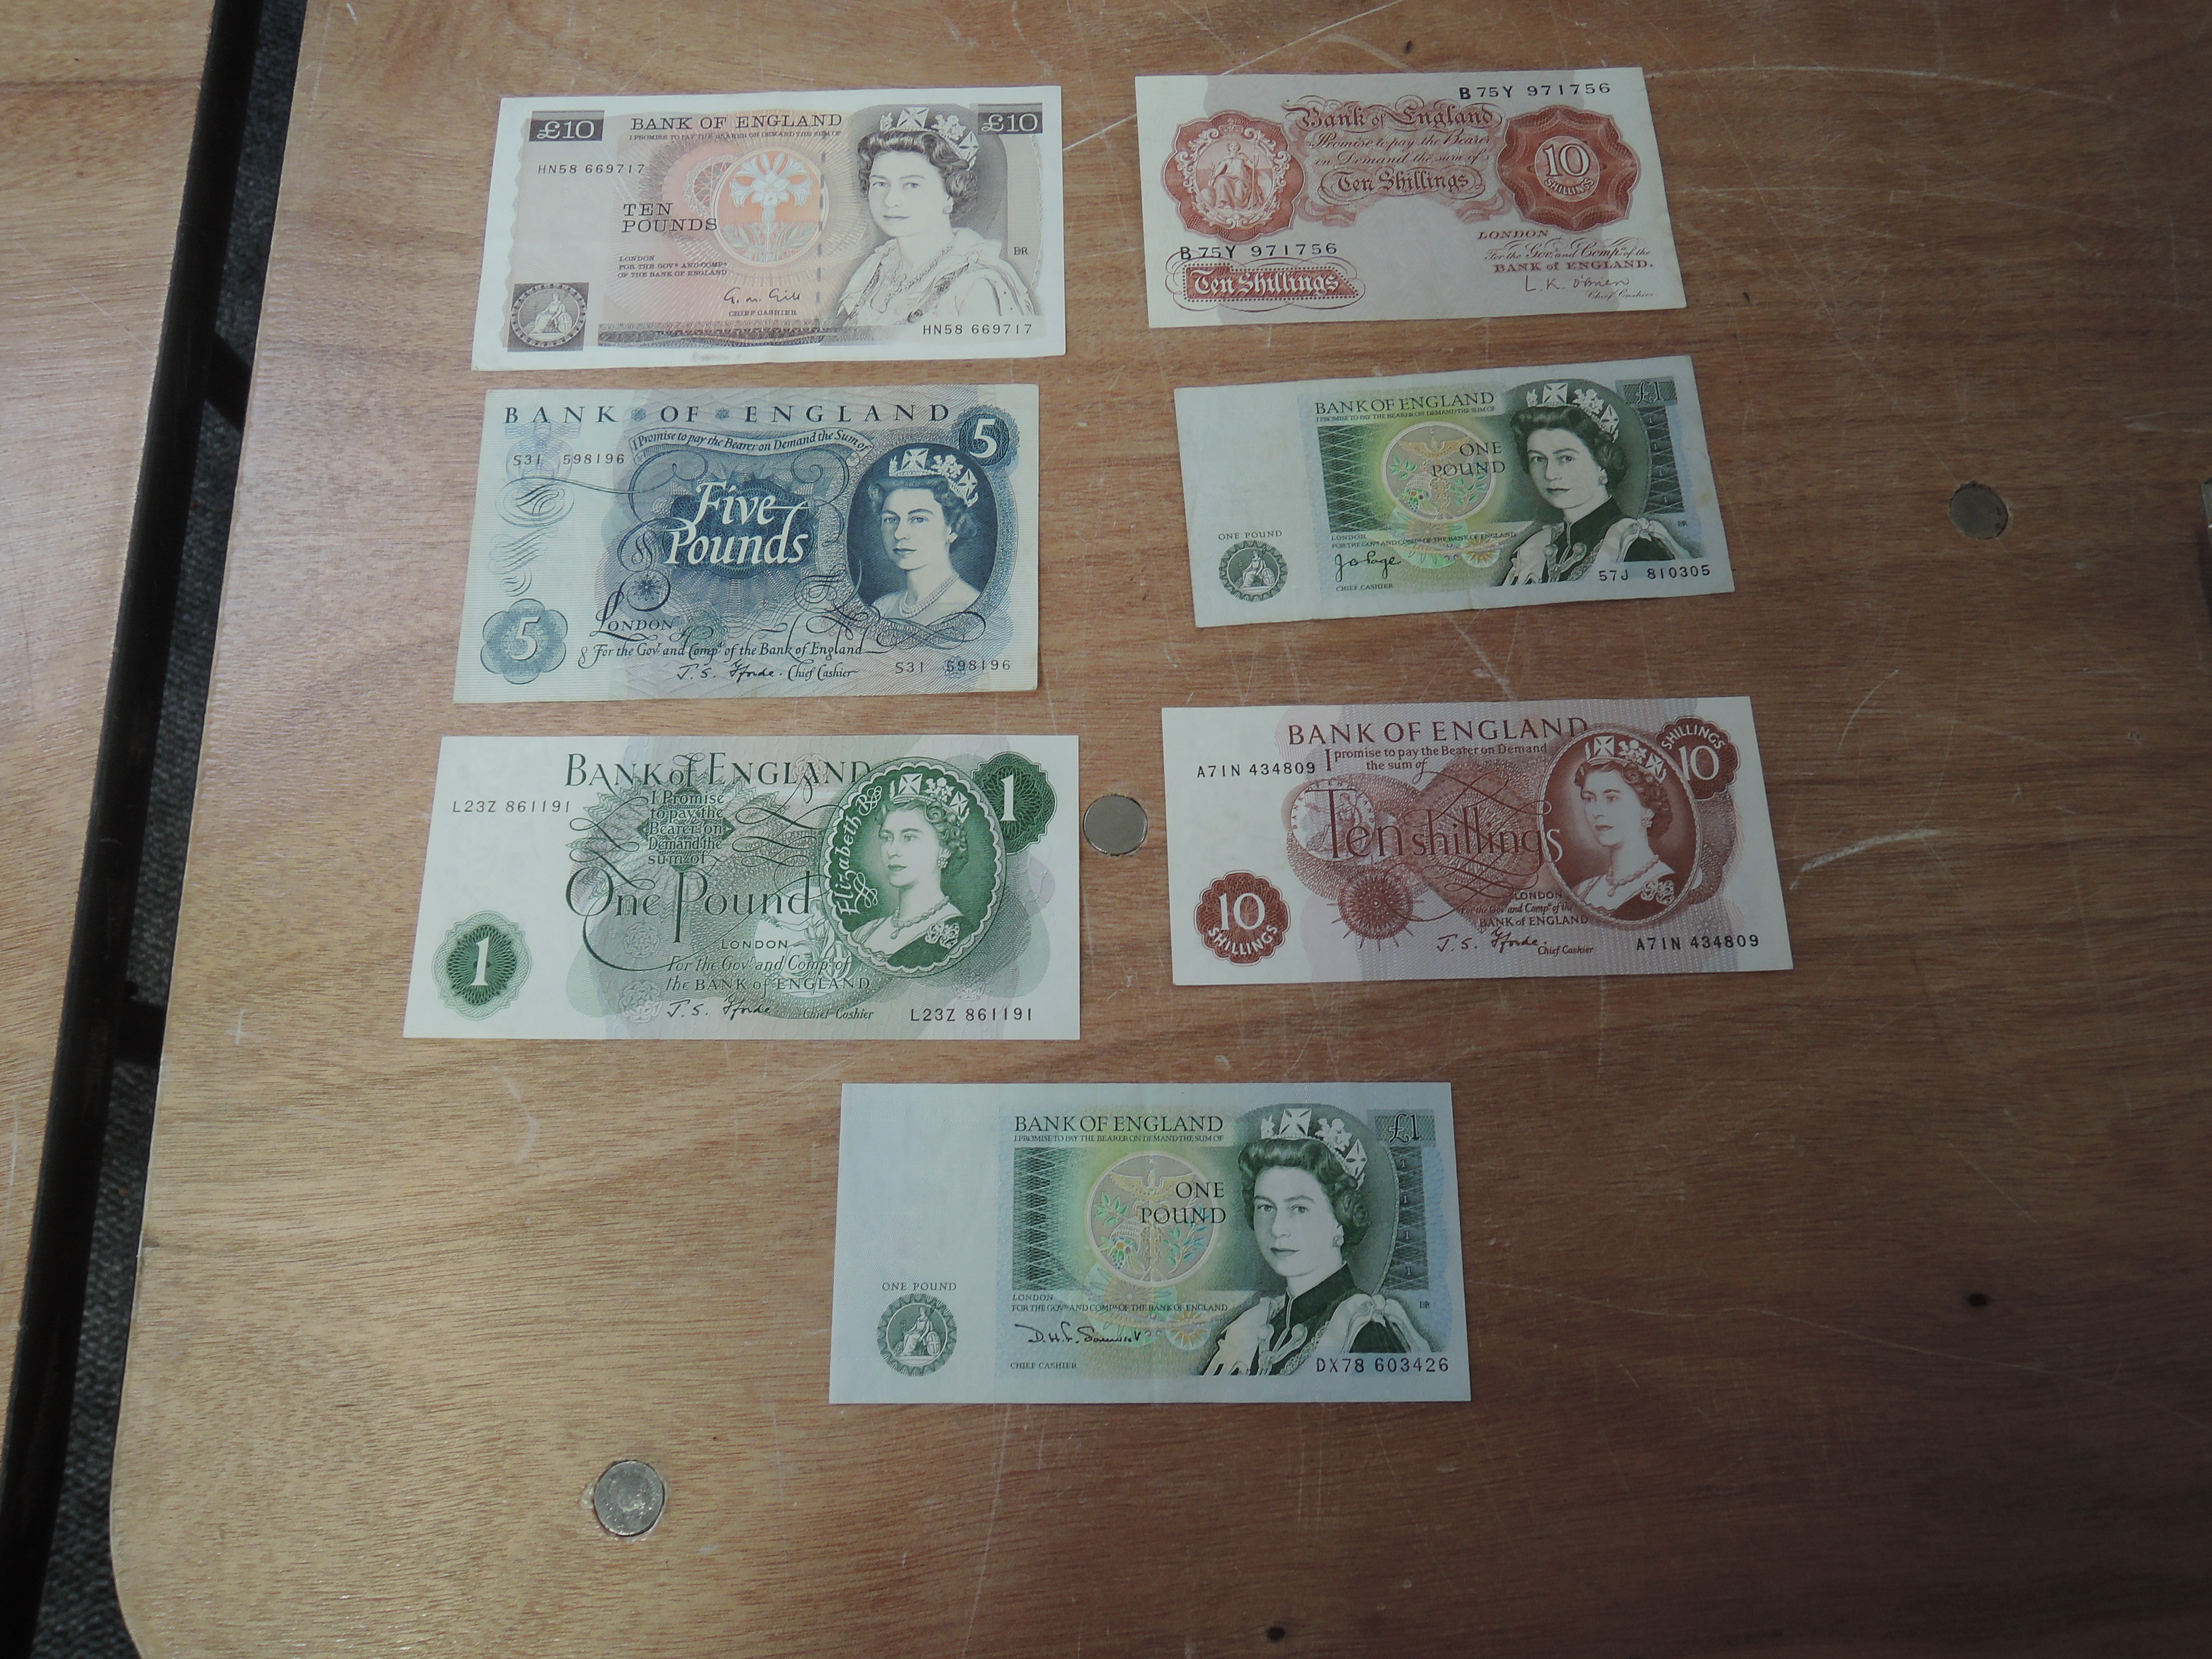 A collection of five uncirculated GB Banknotes, 1967 Fforde A71N 434809 Ten Shilling, 1967 Fforde L - Image 2 of 2